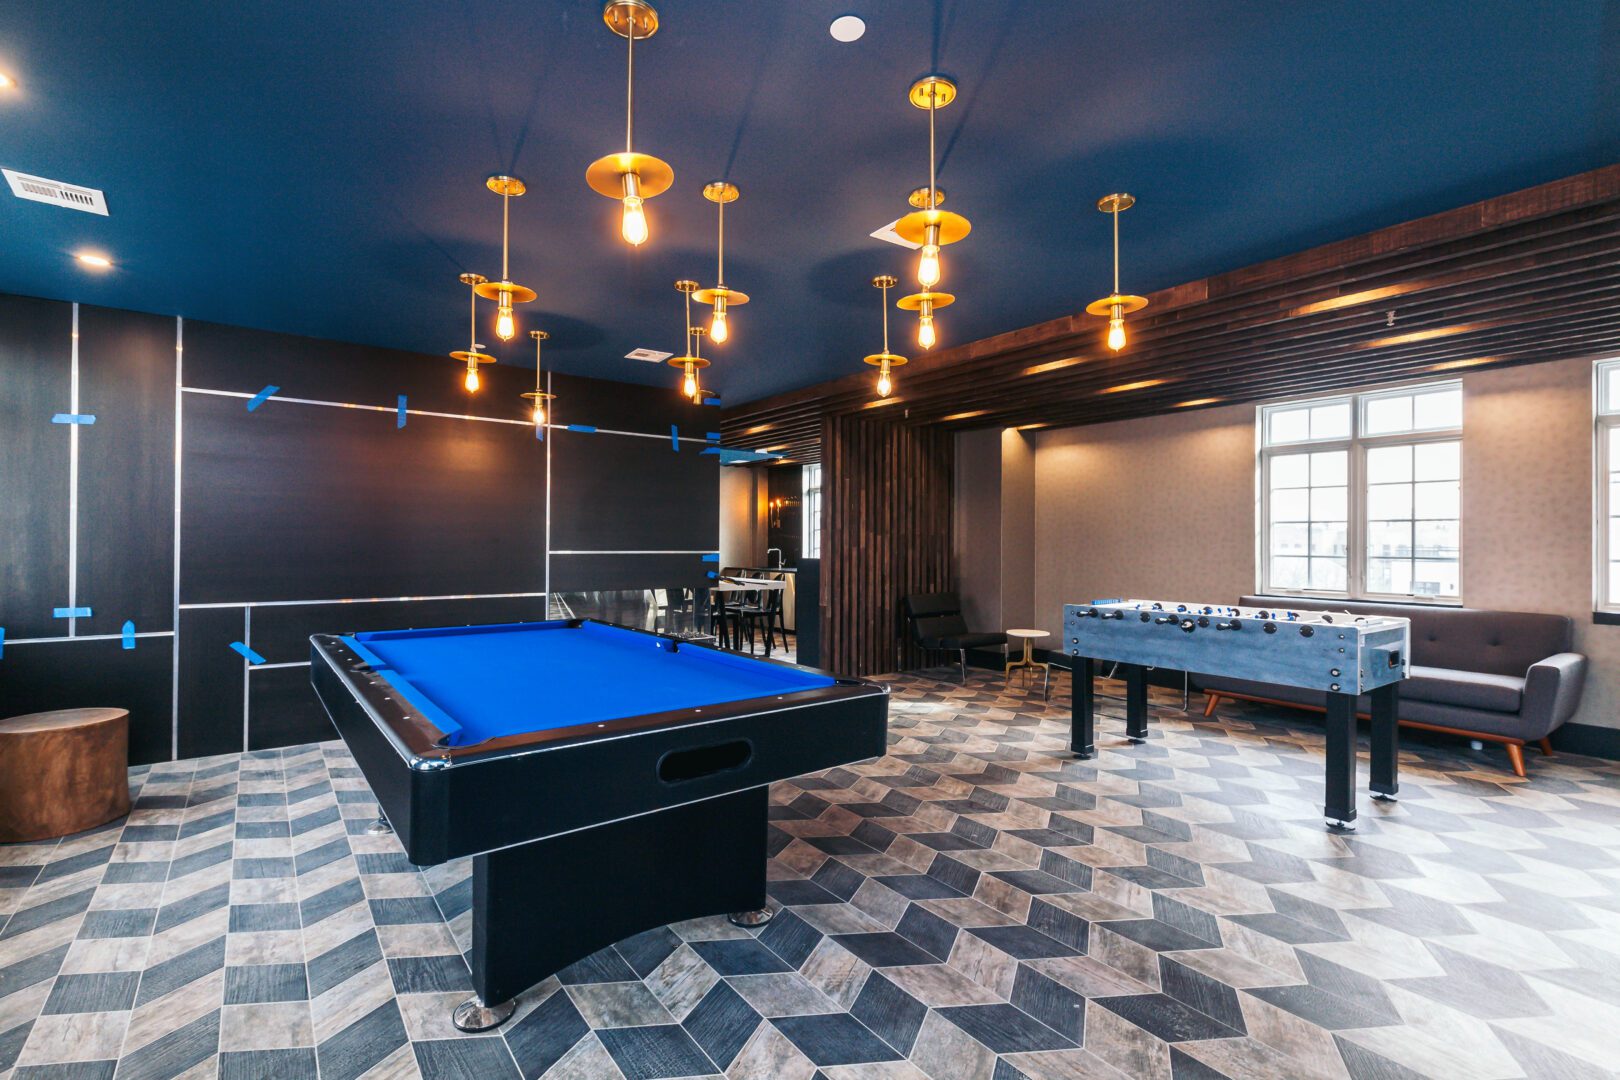 A pool table and ping pong tables in a room.